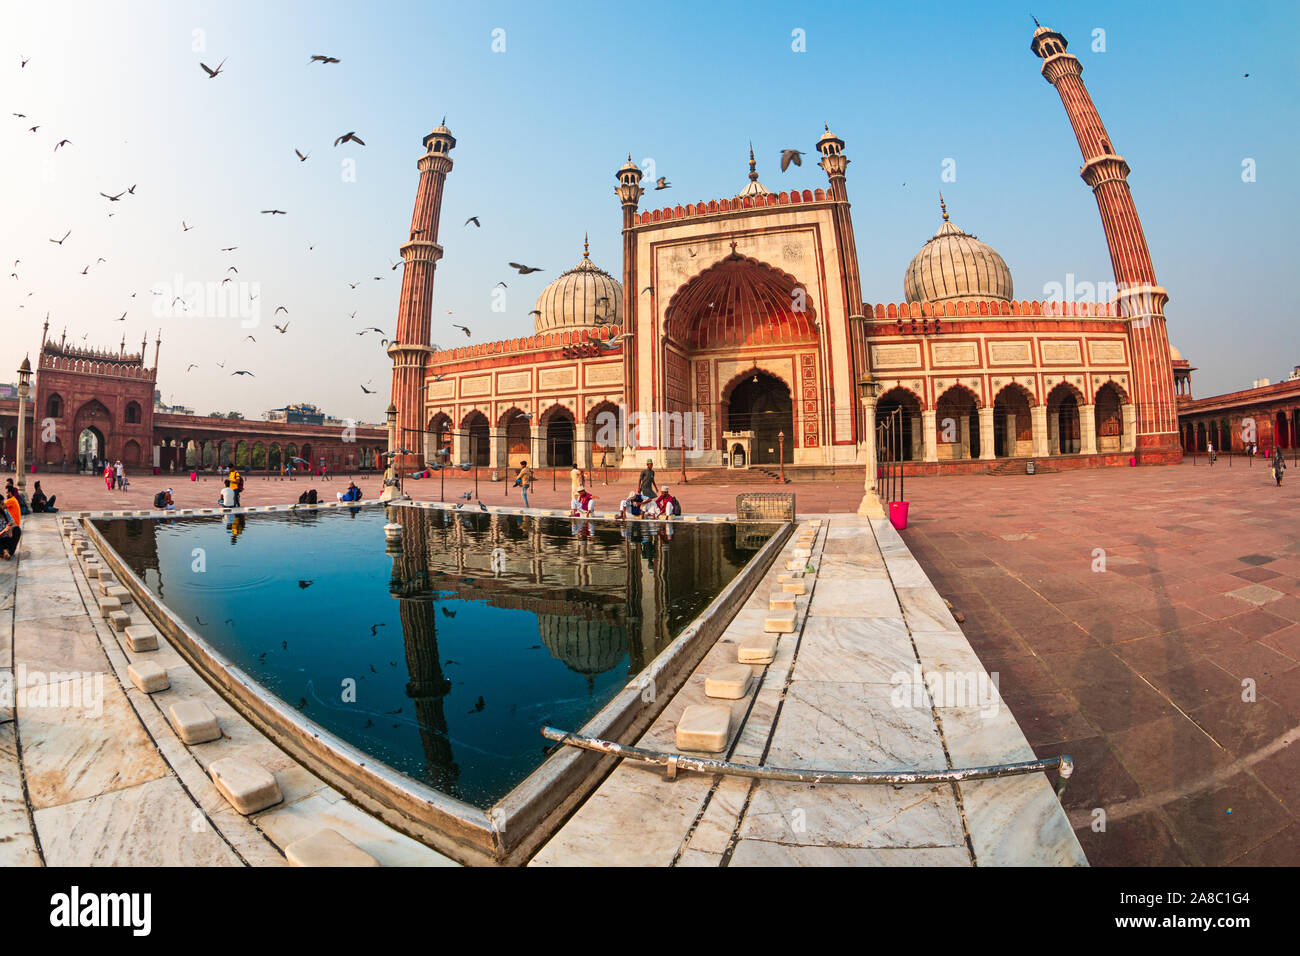 Interior and Exterior Jama Masjid of Delhi - The largest mosque of India  Stock Photo - Alamy